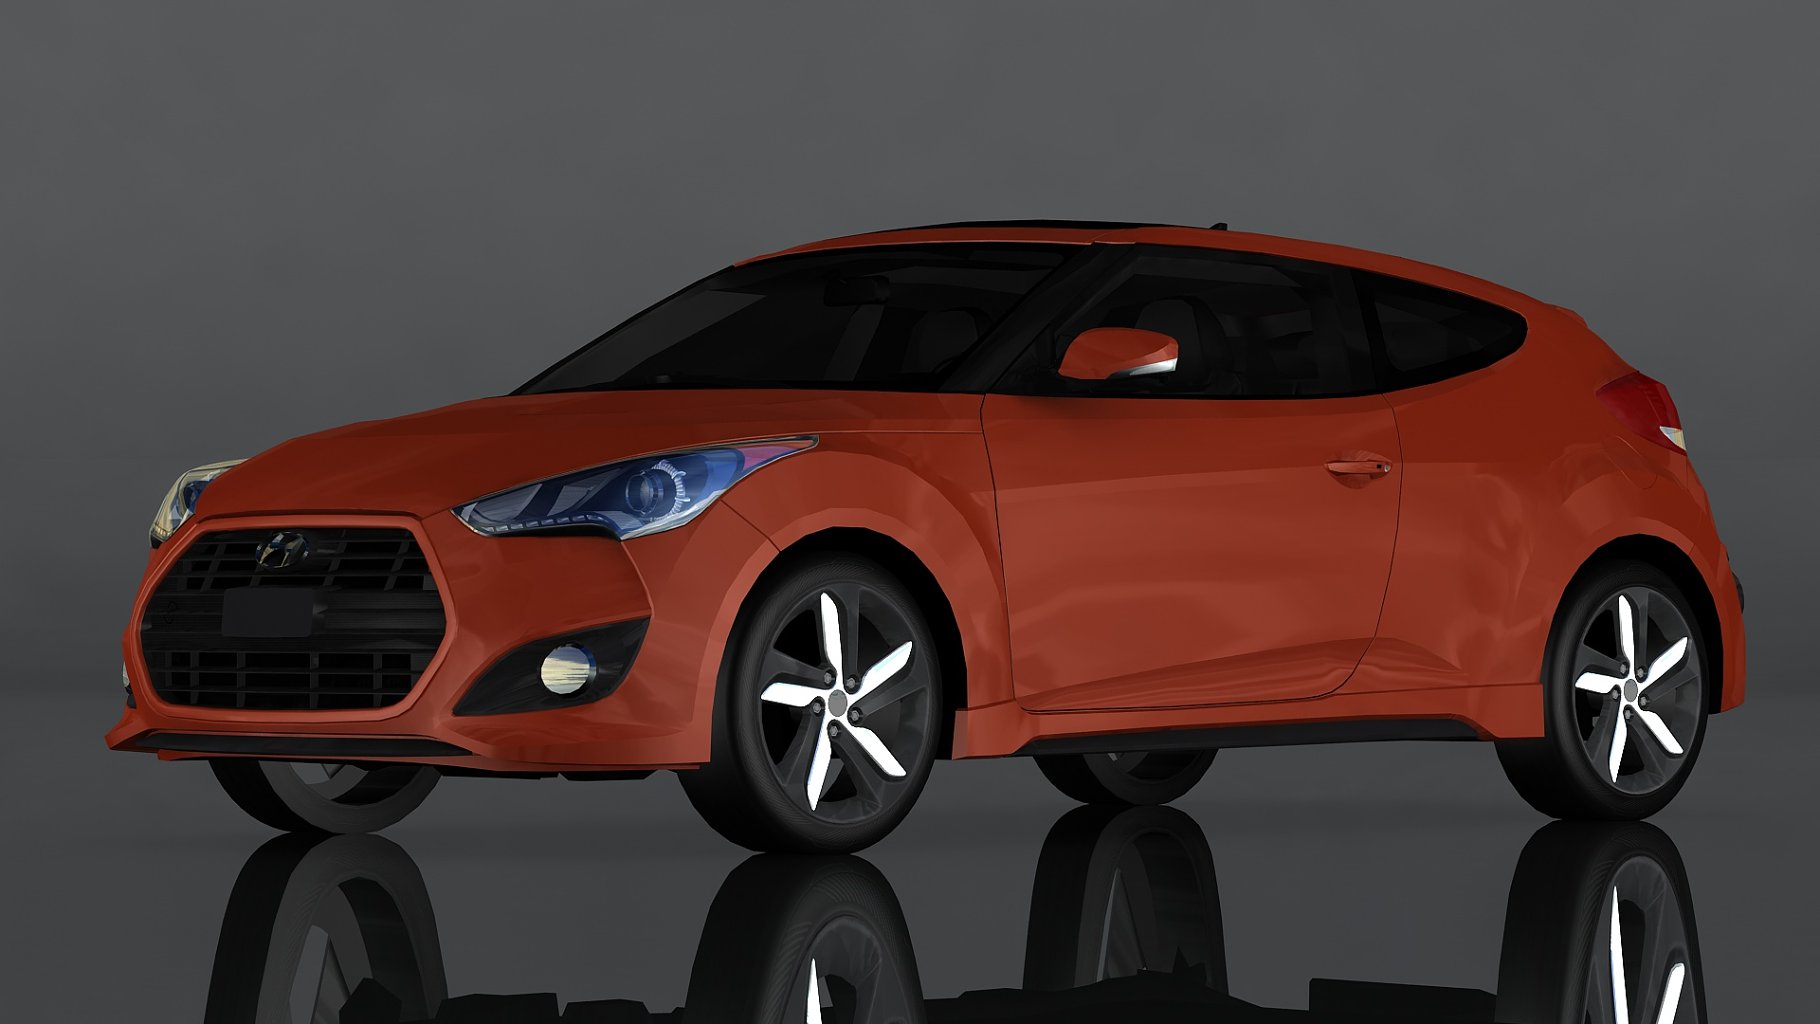 Hyundai veloster mockup in the right side.